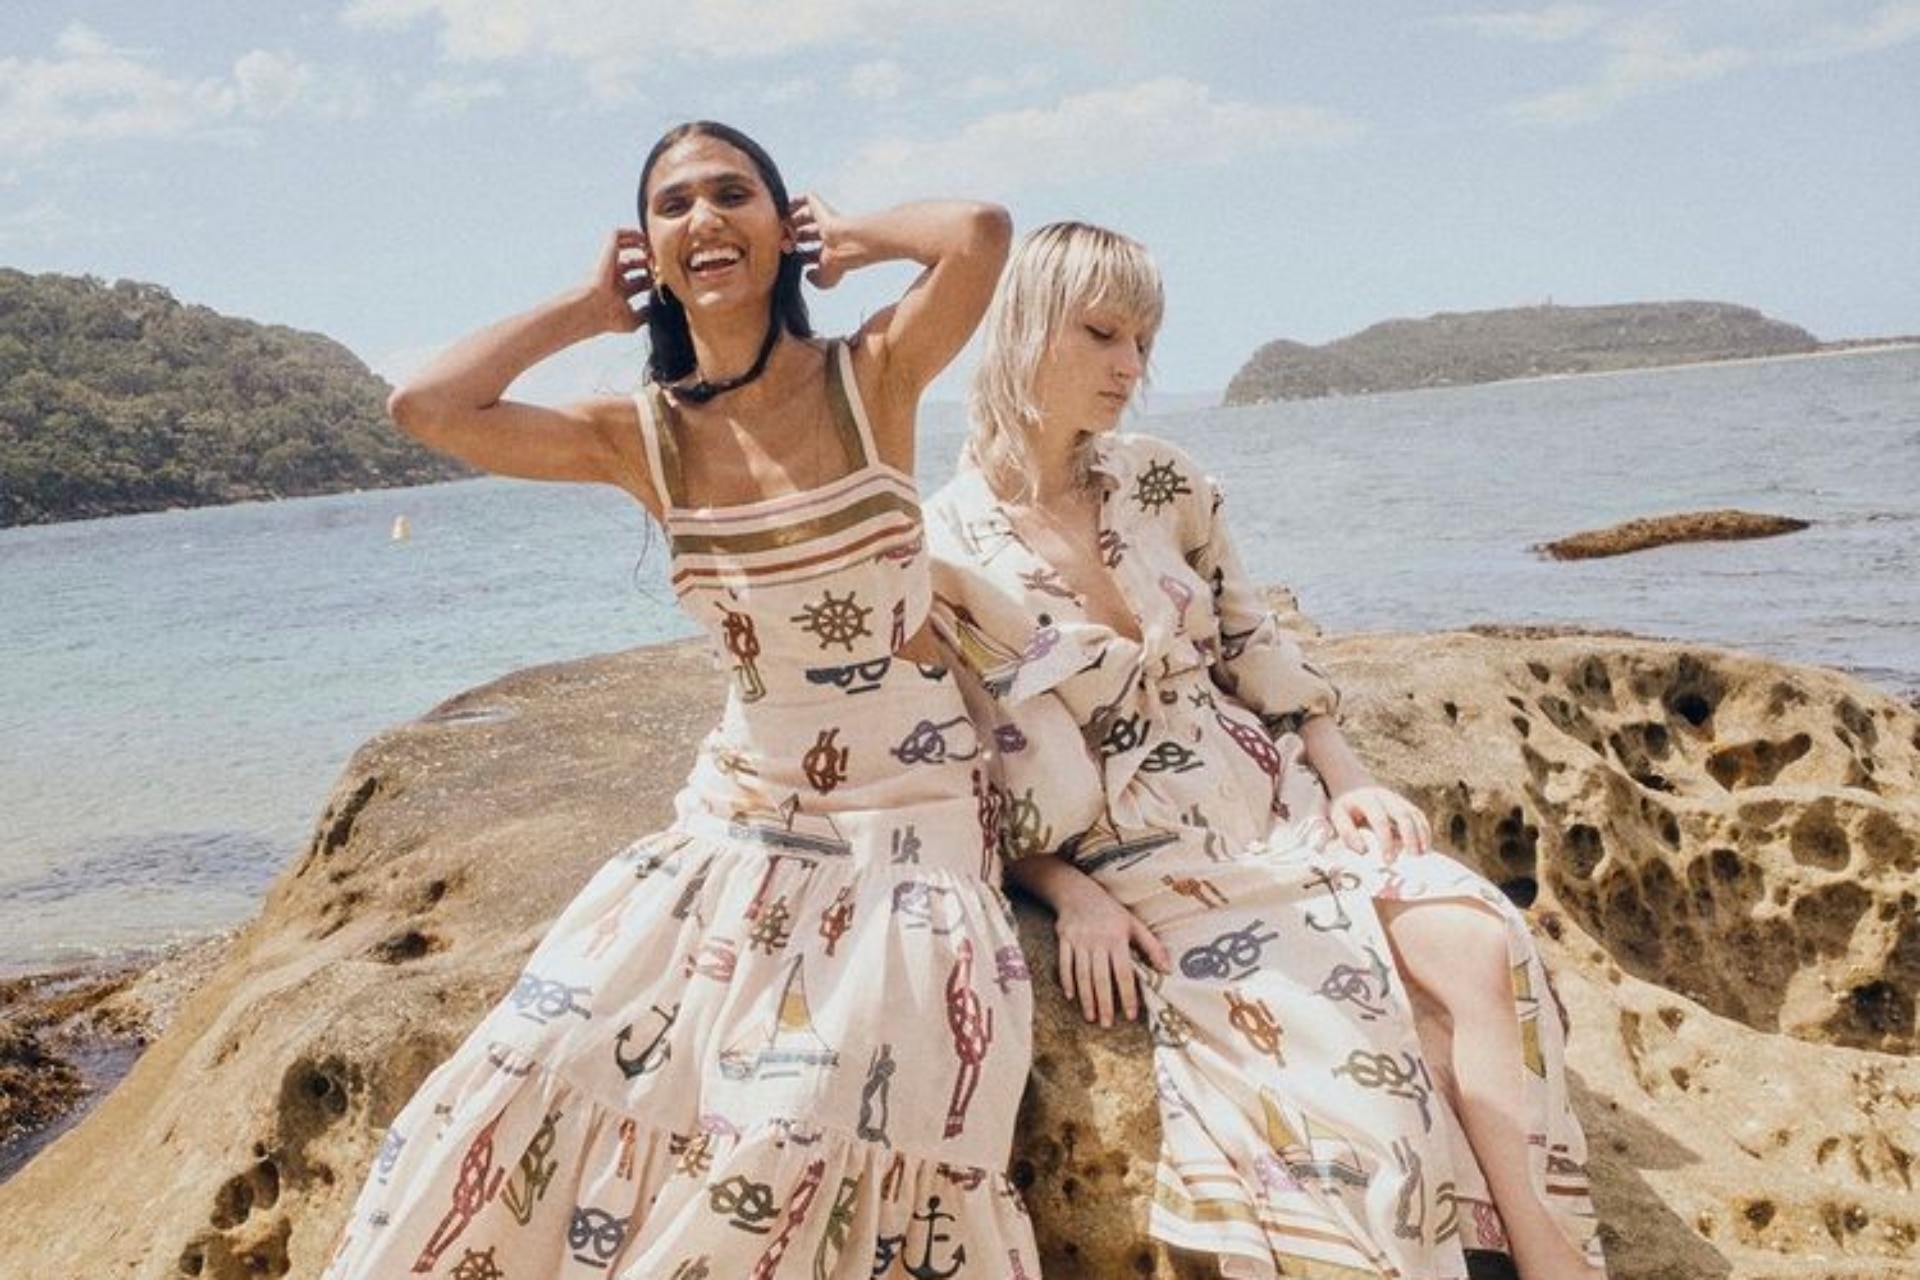 The 13 best boho brands from Australia you just have to discover